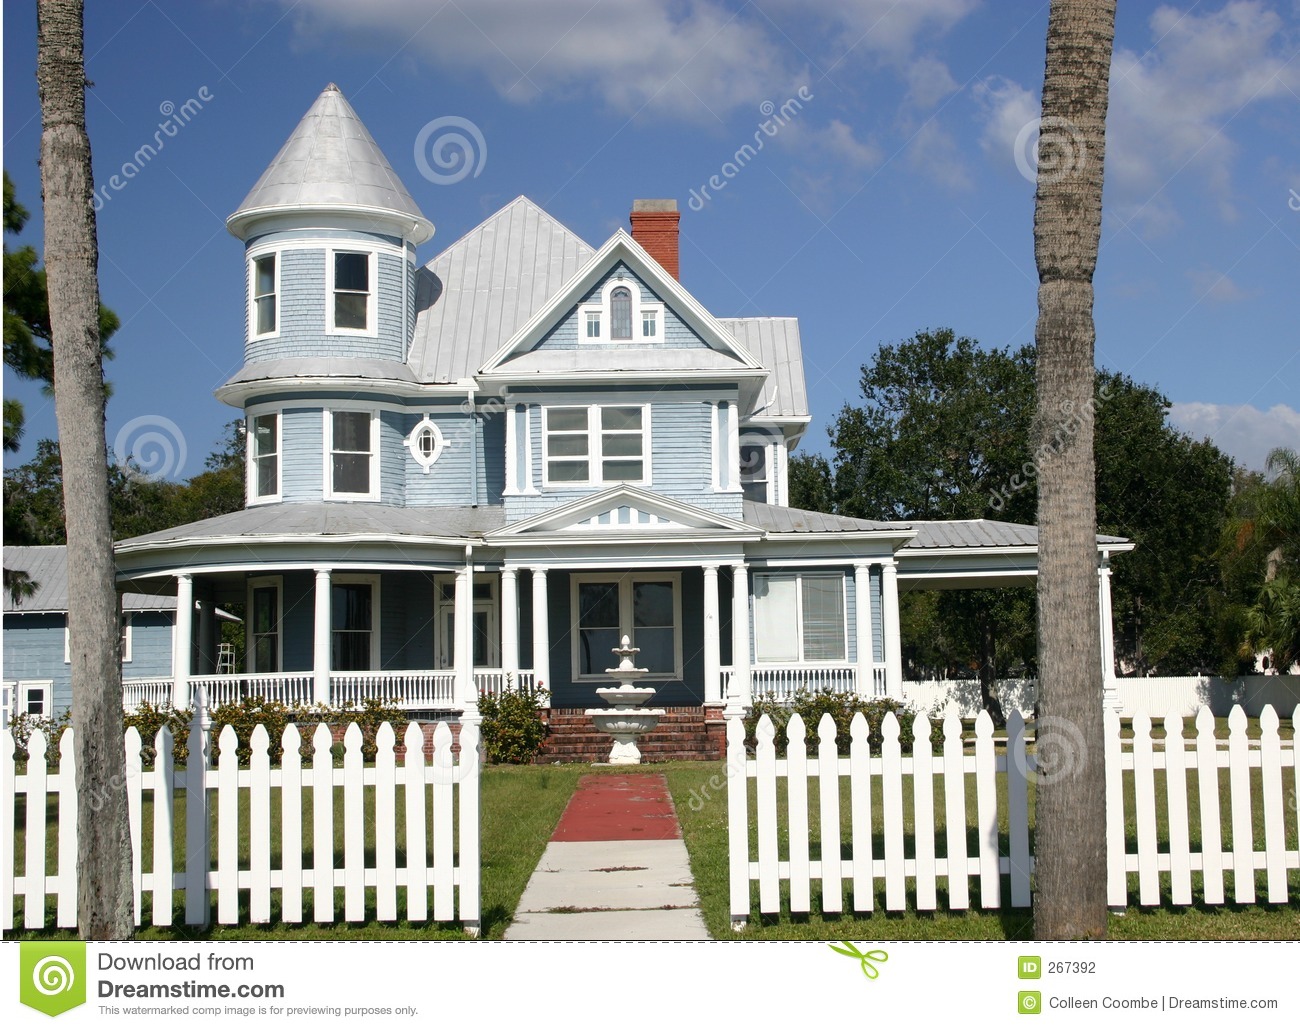 Blue Victorian Home With White Trim Andbordered By Picket Fence